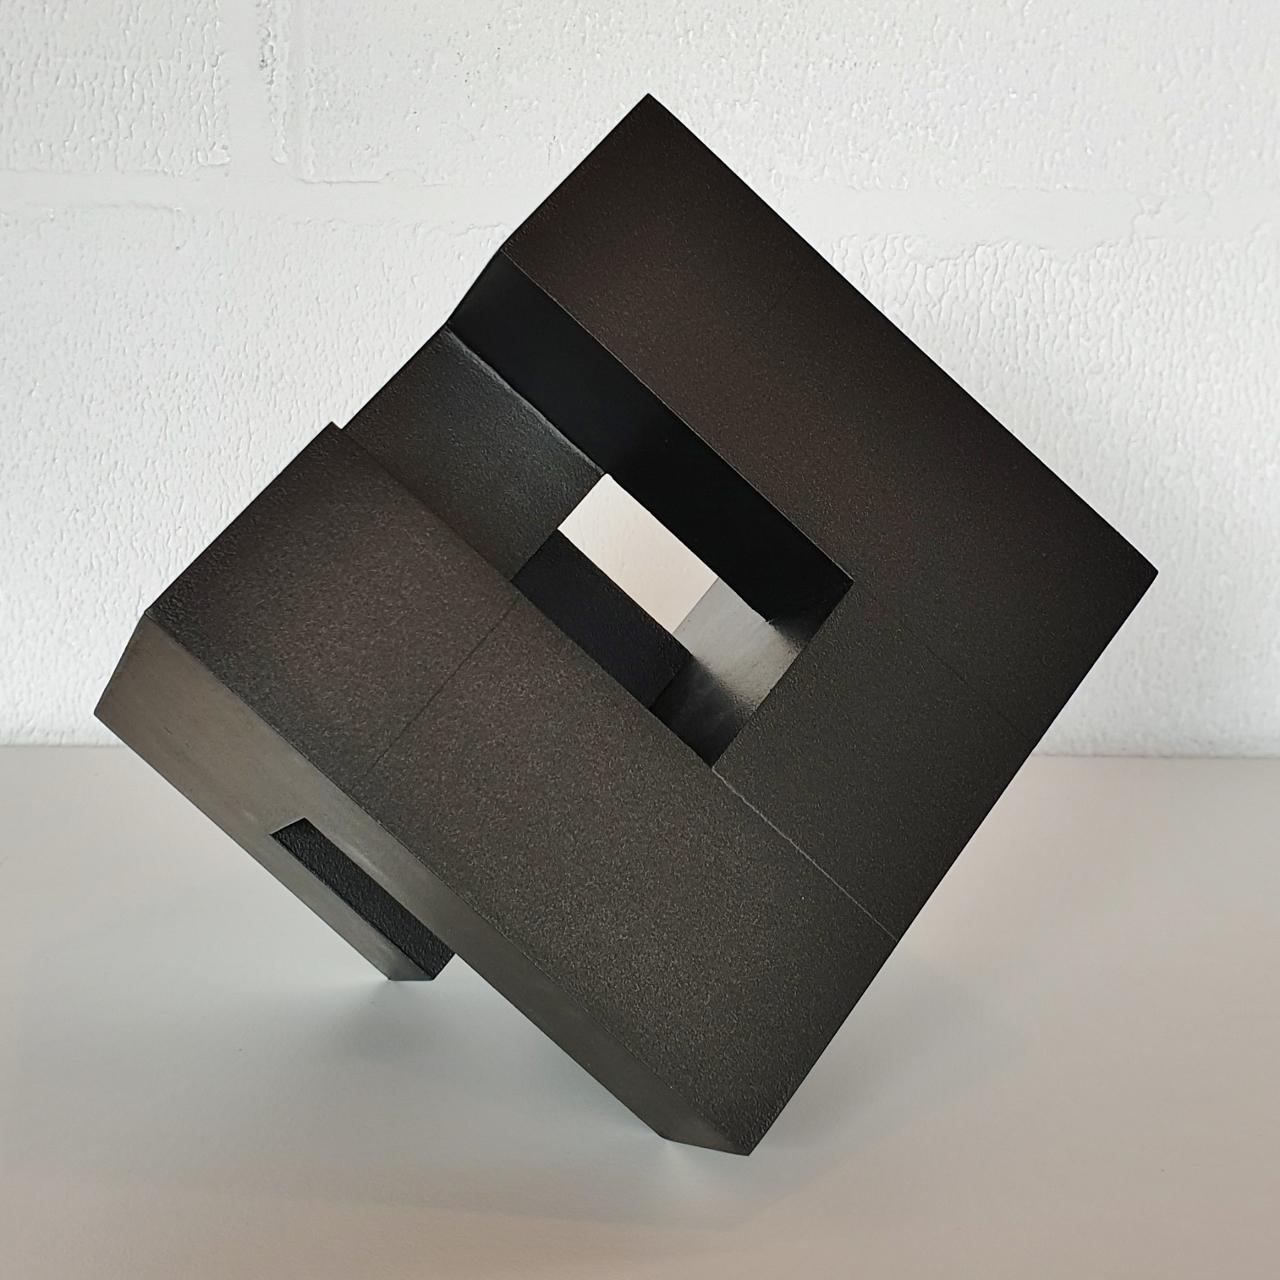 Cube architectural I is the first of two free standing contemporary modern abstract wall sculptures from the Architectural-series by French-Dutch artist Olivier Julia. This sculpture is made from carefully cut, glued and sanded wood fiberboard